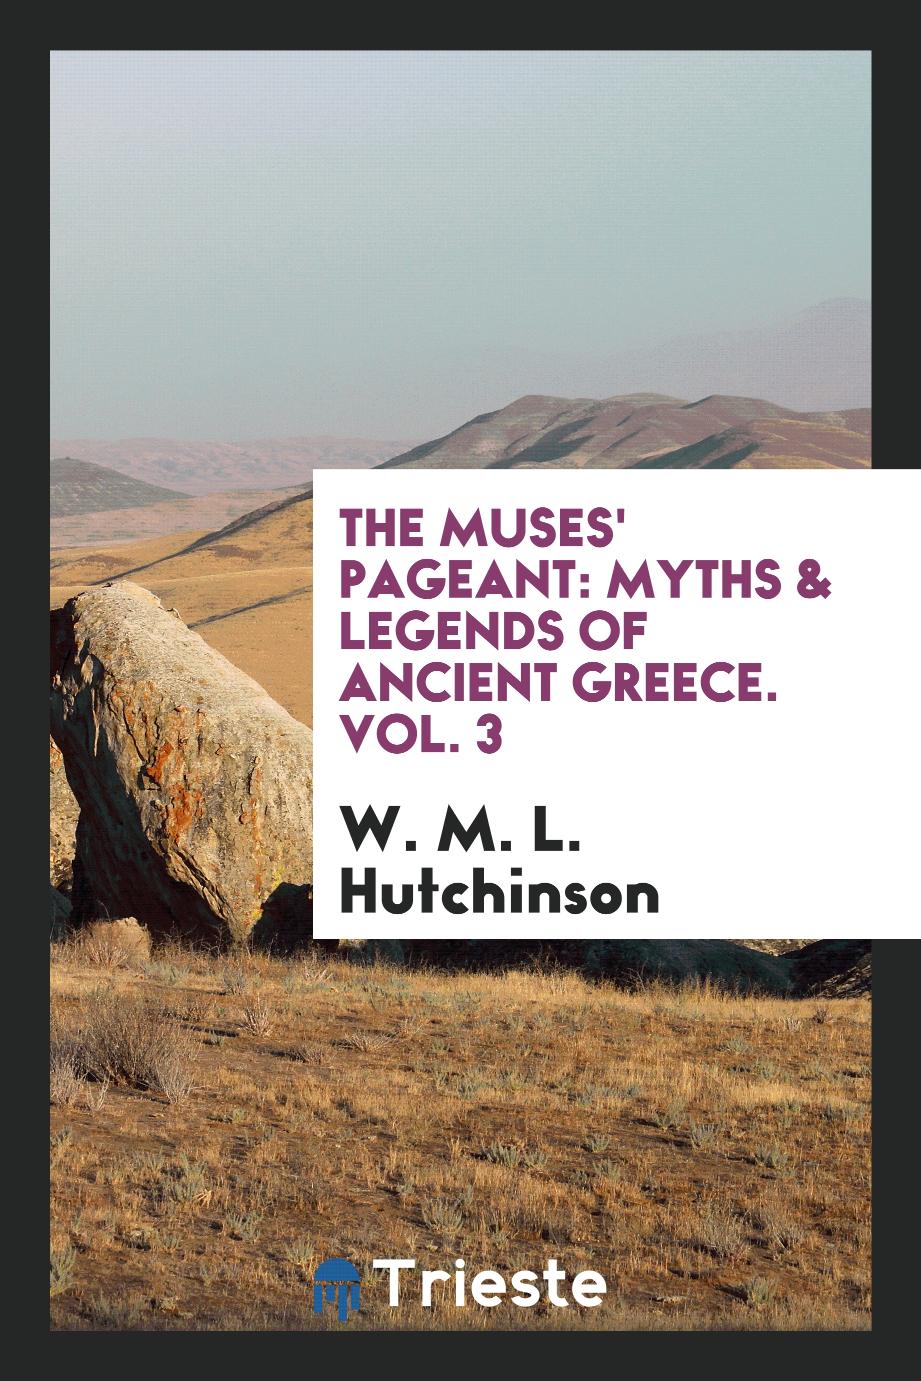 The Muses' pageant: myths & legends of ancient Greece. Vol. 3